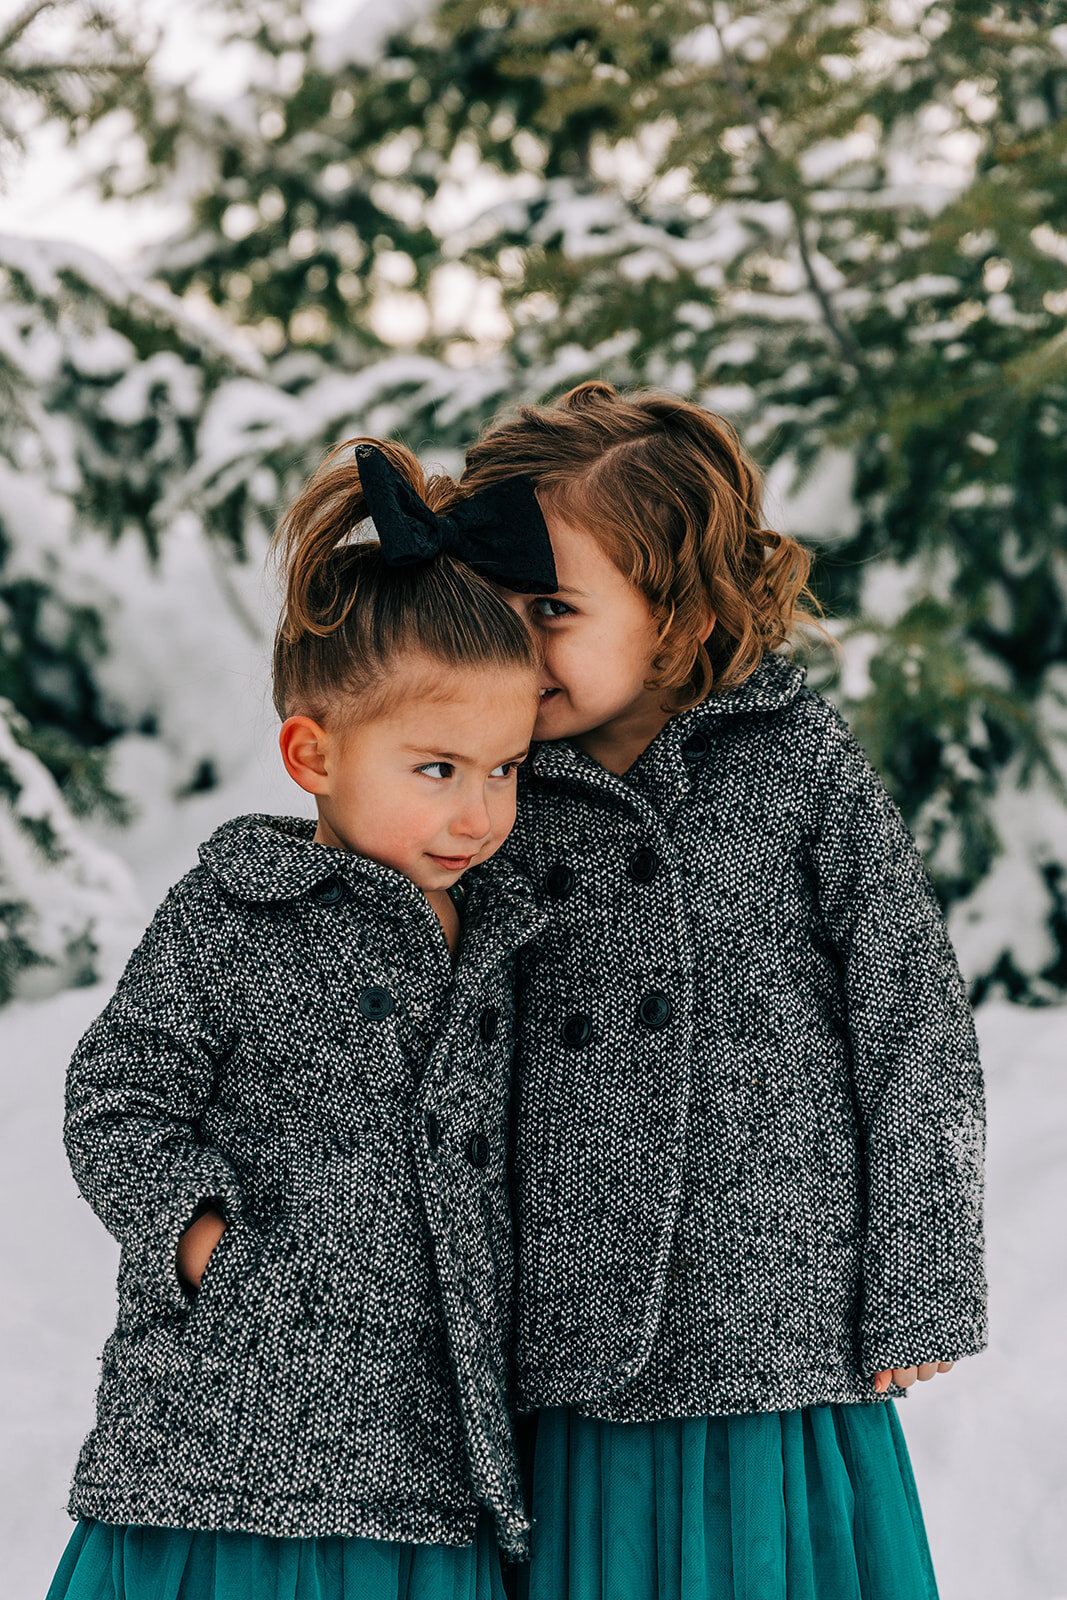  sisters in matching coats and dresses sister love best friends winter fashion family pictures daughters family picture styling inspiration family pose ideas winter photoshoot snowy pictures adams acres tree farm family photographers in utah professi